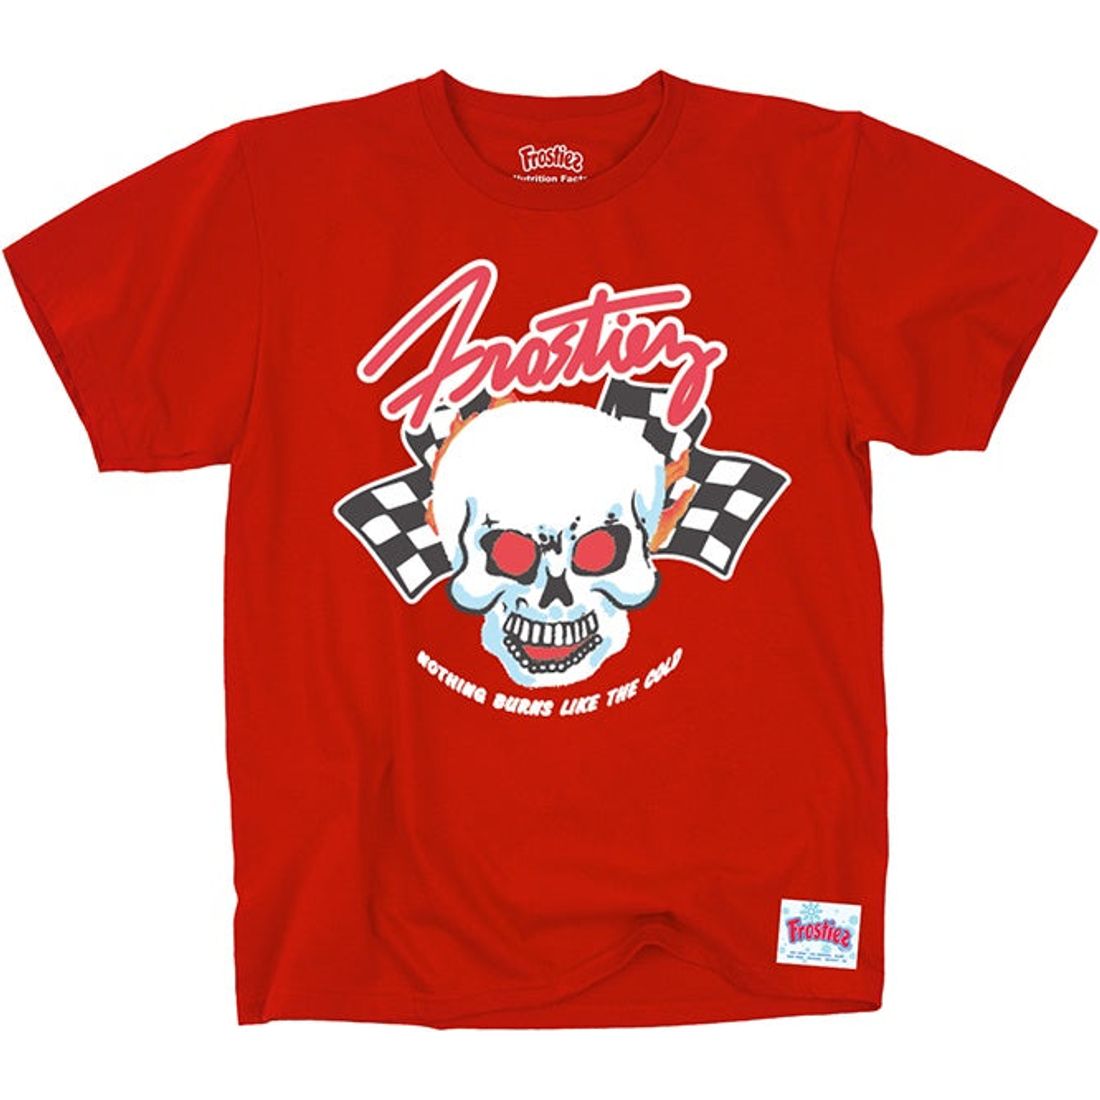 Frostiez "Victory" SS Red Tee (931-1205)